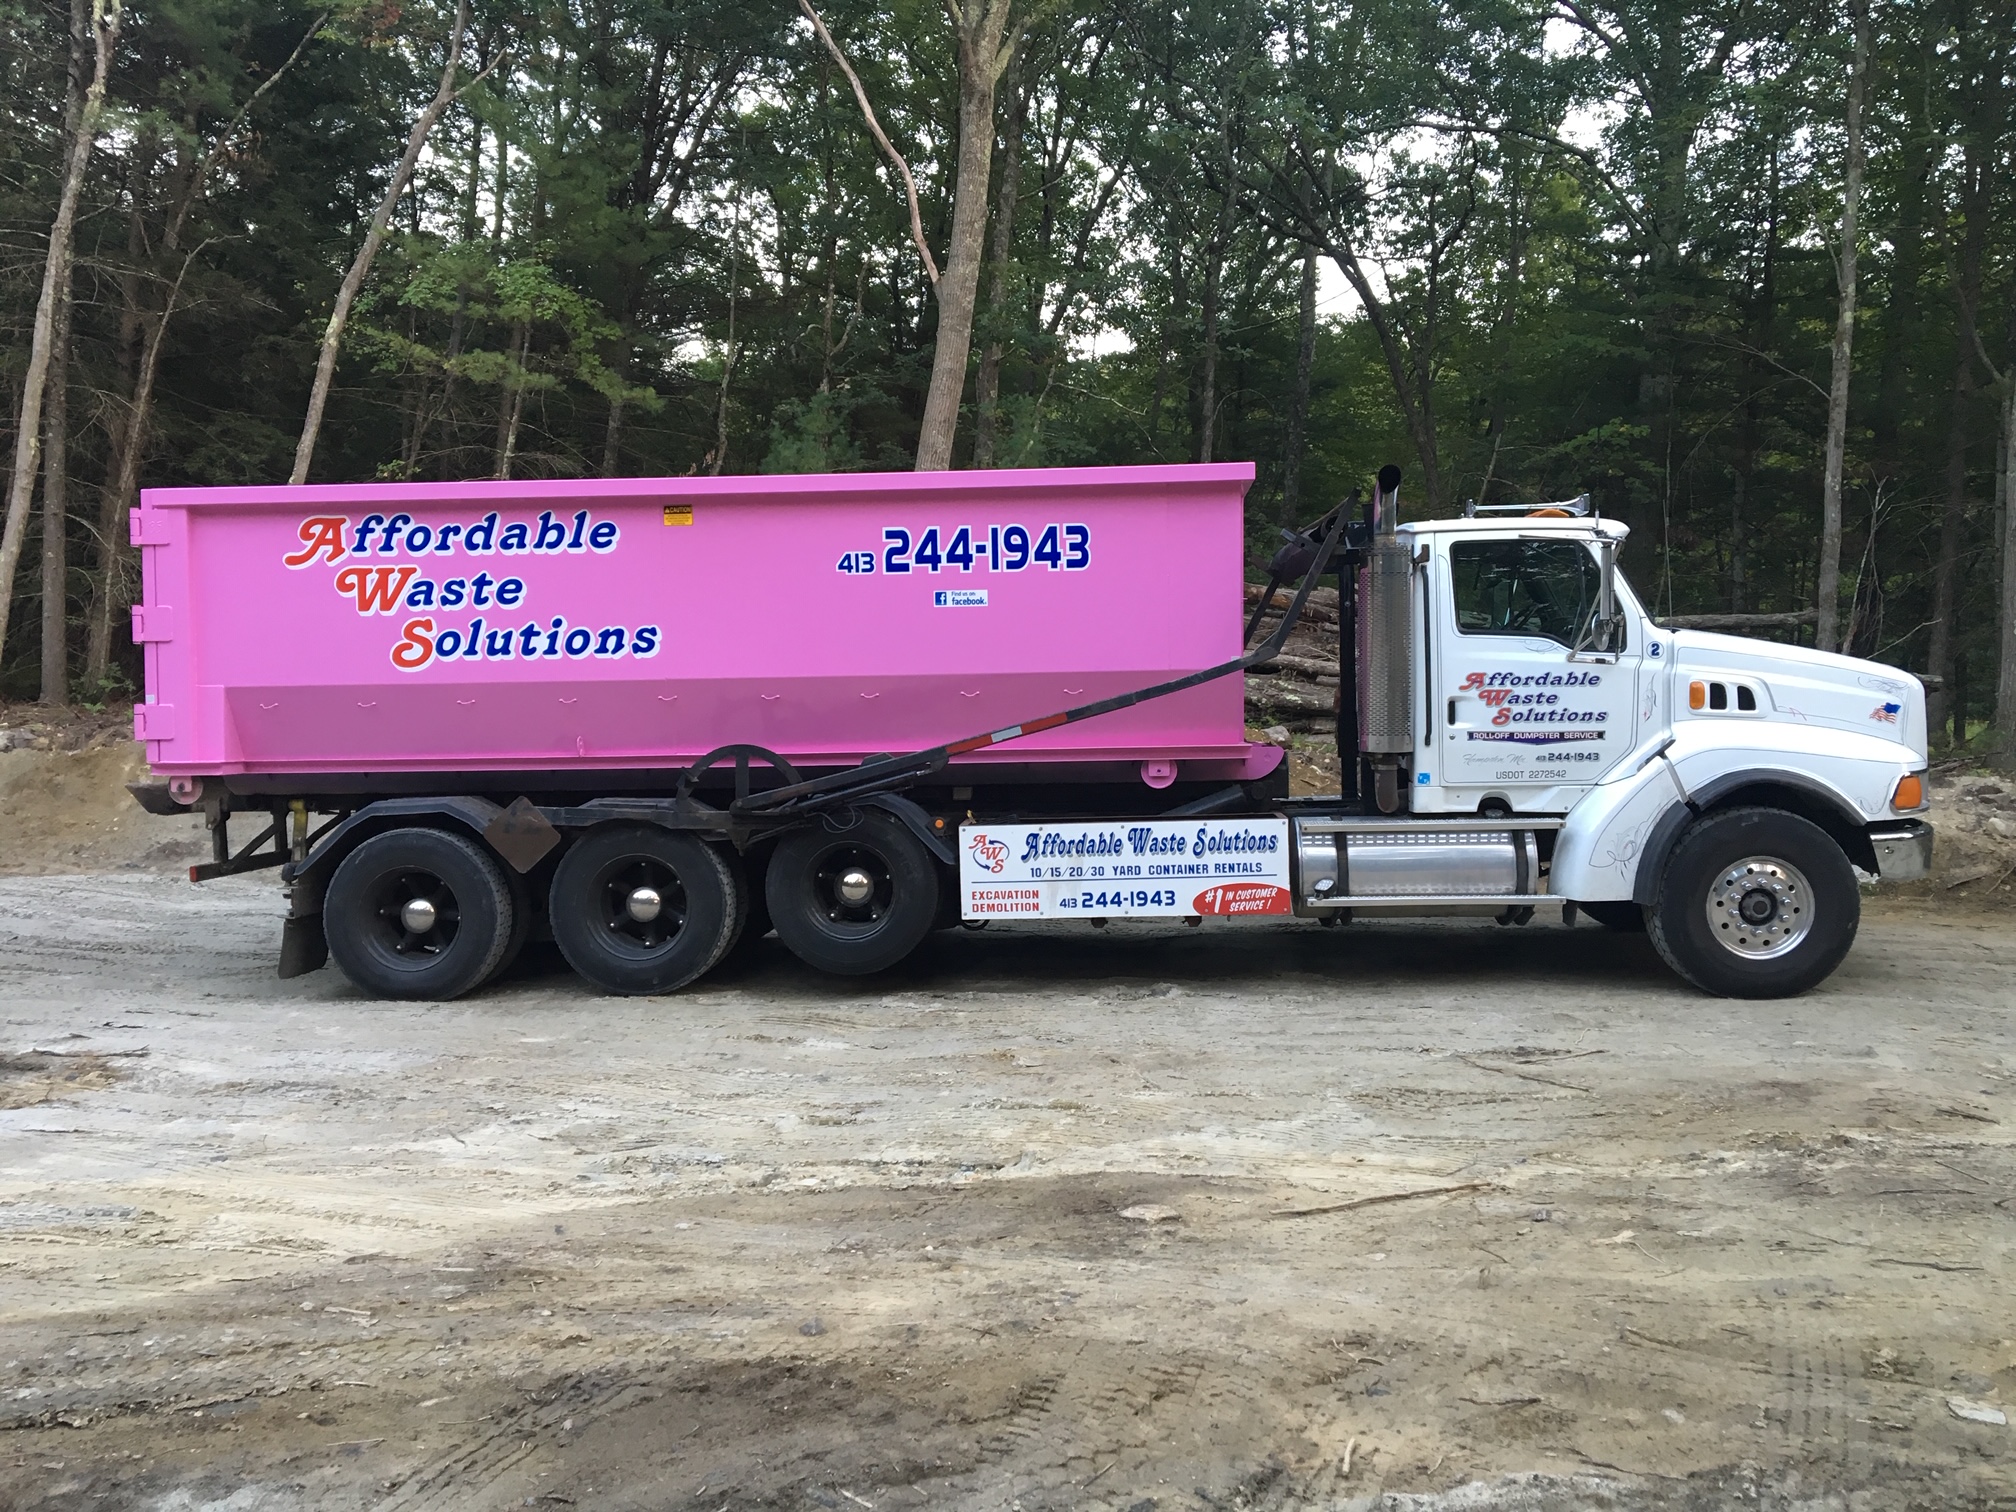 Affordable Waste Solutions, Inc. | Dumpsters | Hampden, MA